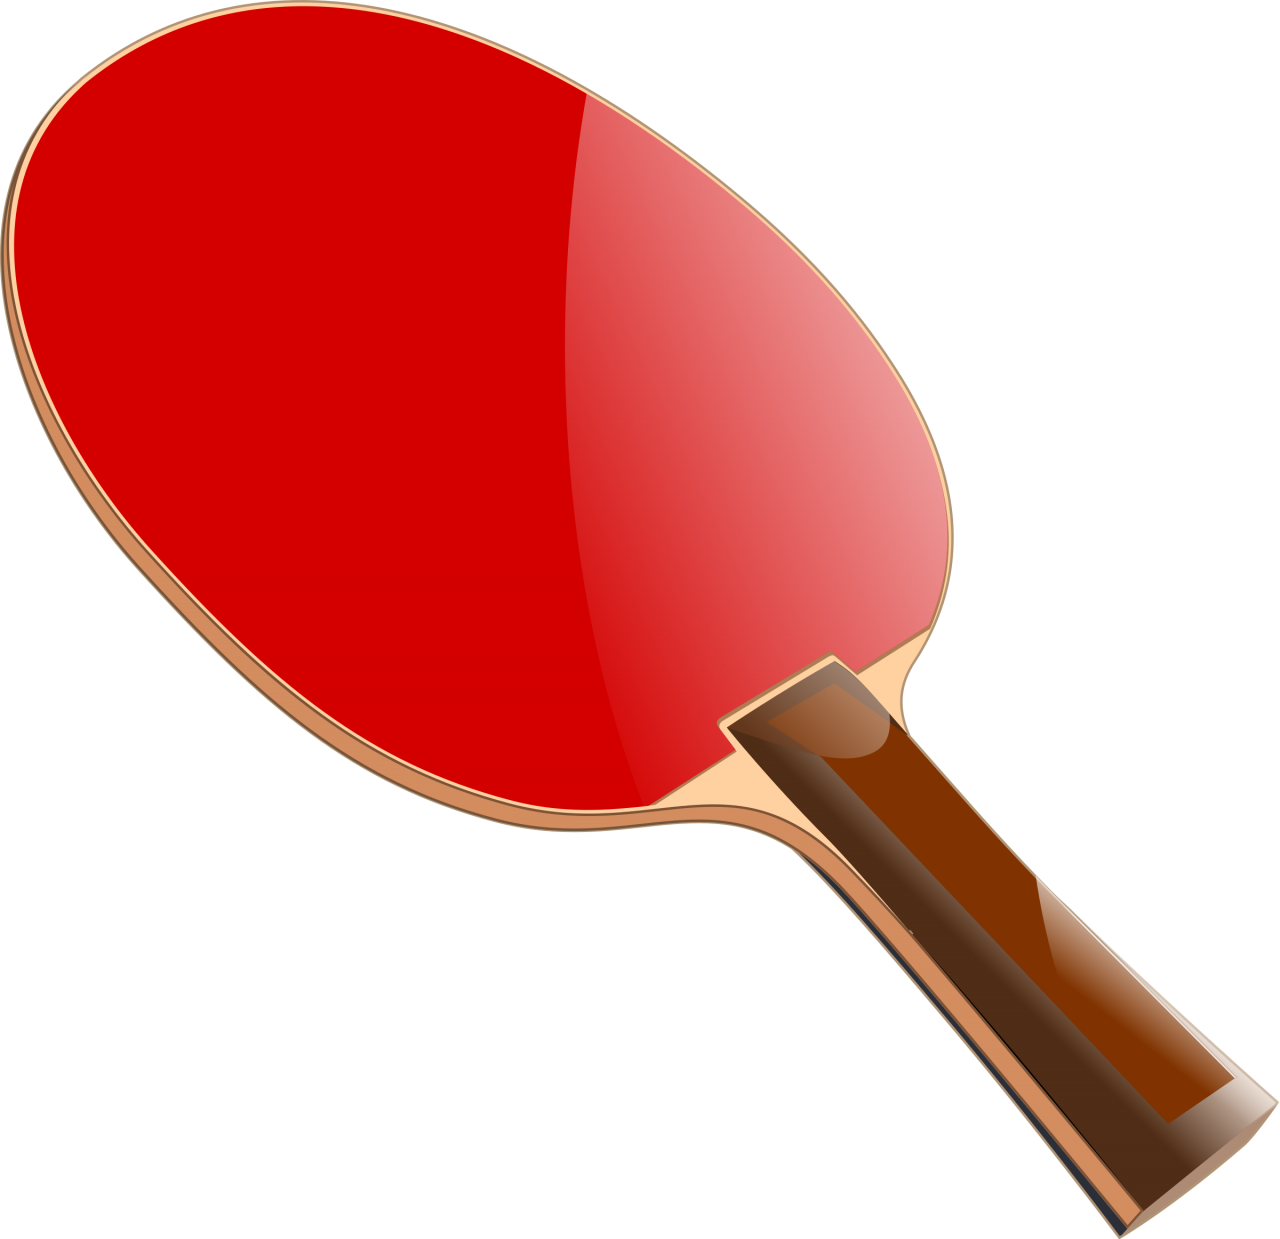 Ping Pong PNG Image PurePNG Free Transparent CC0 Library.